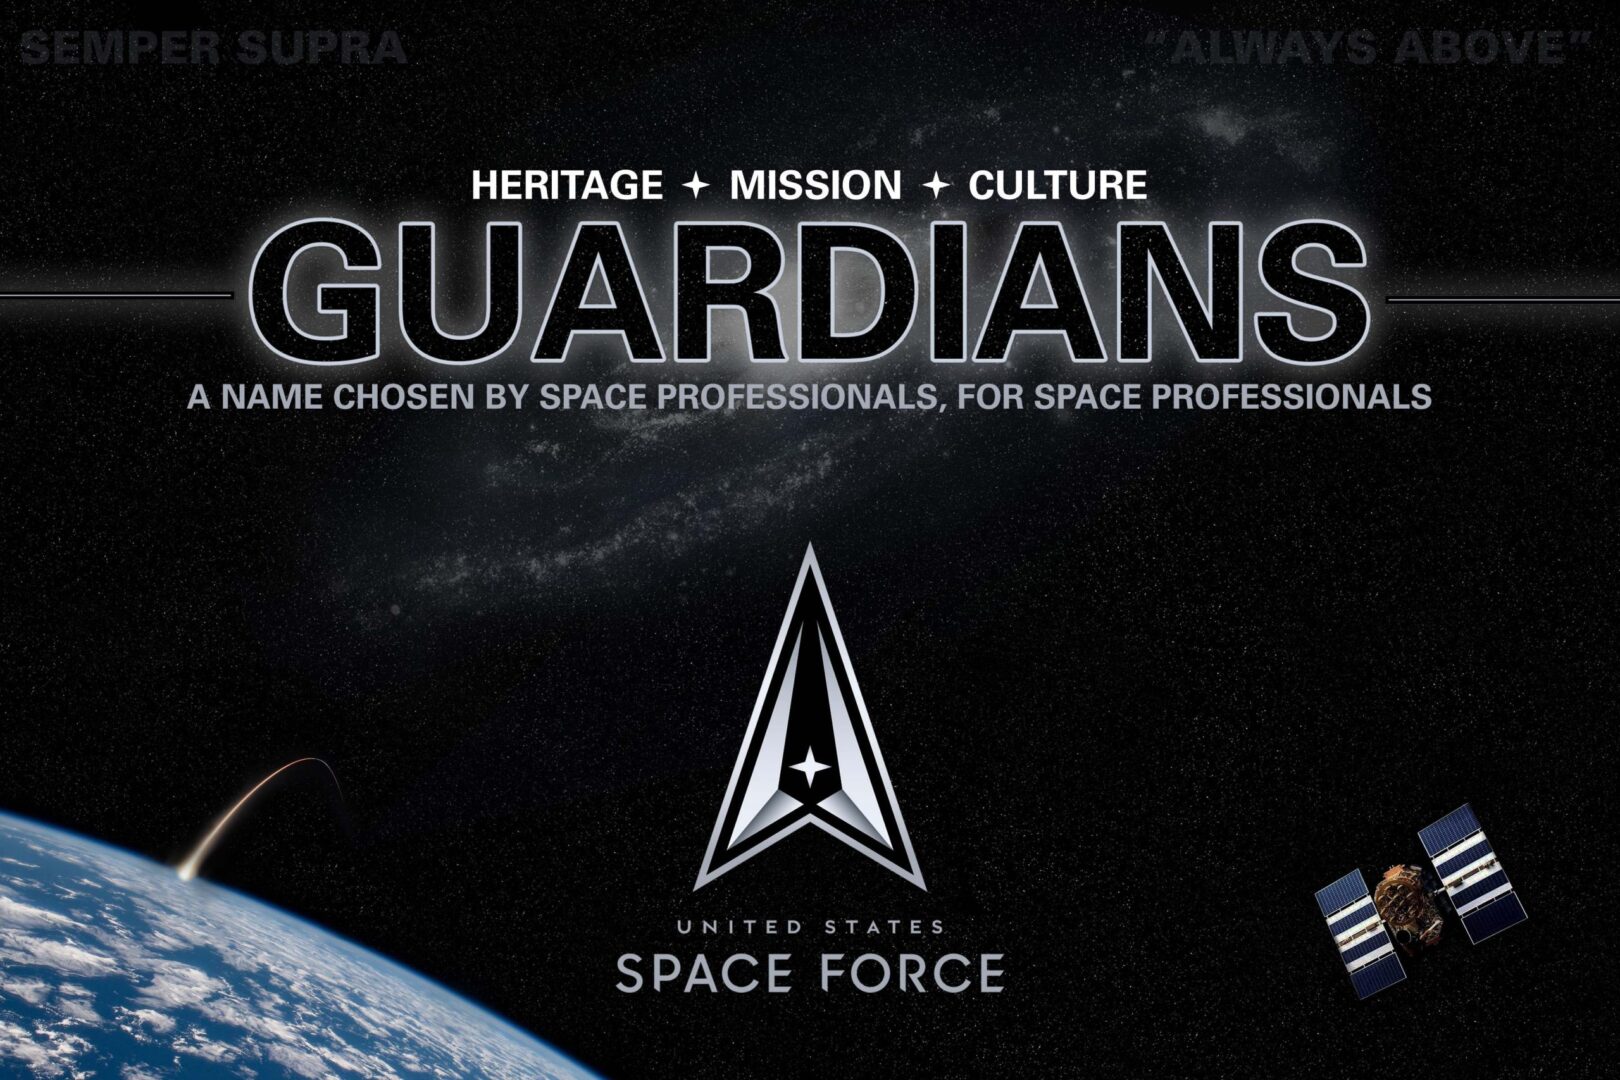 Space Force Guardians - Credit Space Force